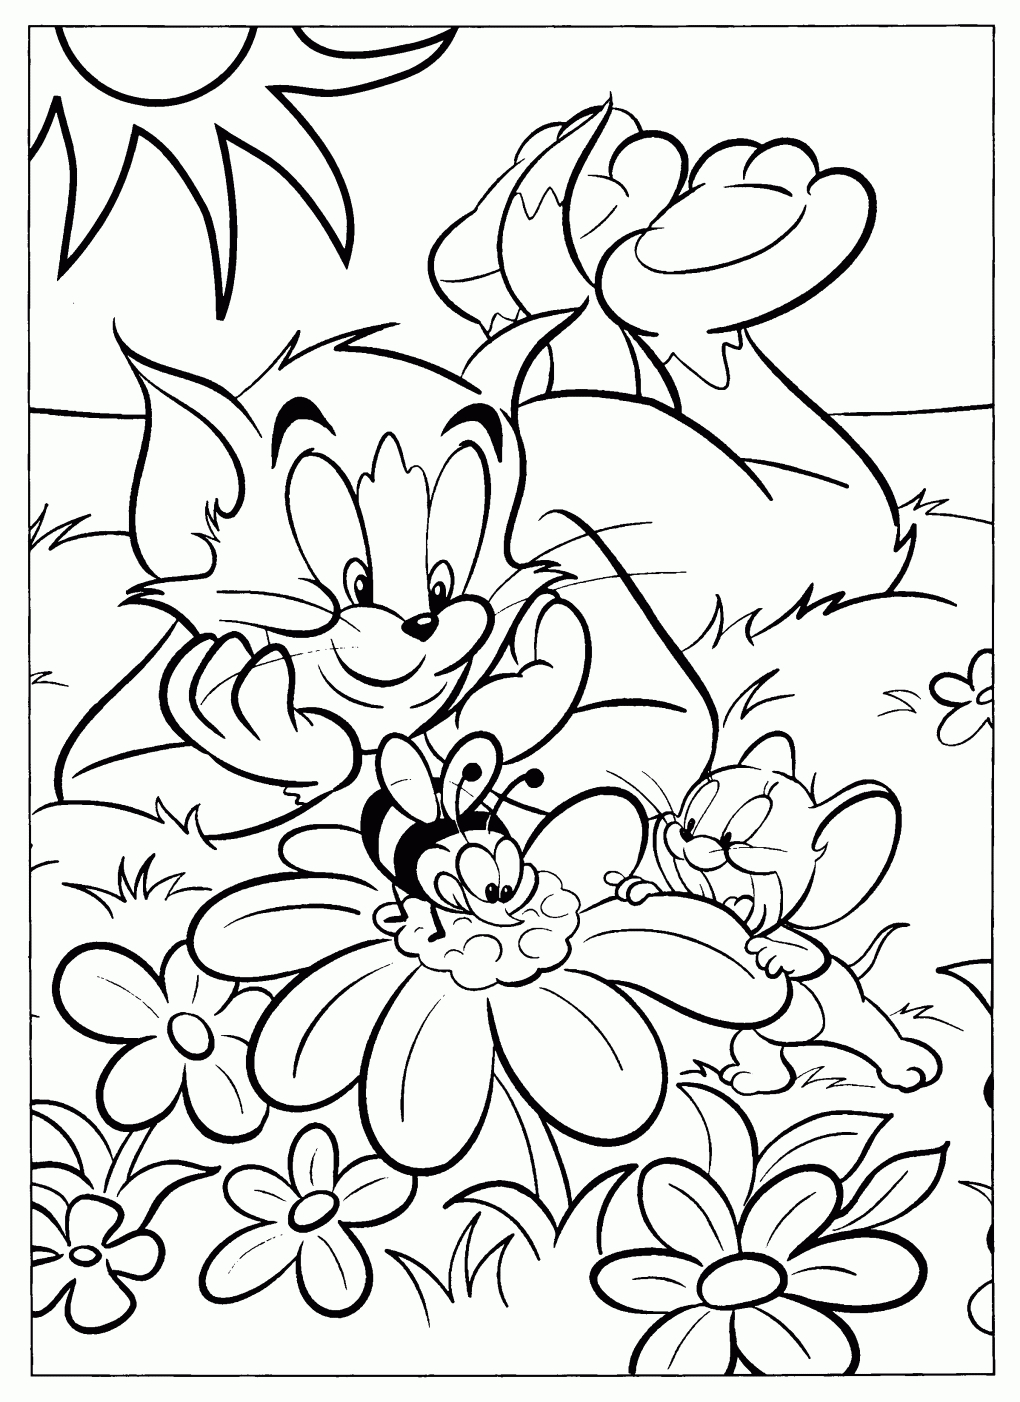 Tom &amp;amp; Jerry Coloring Page | Coloring Pages And Printables | Coloring - Free Printable Tom And Jerry Coloring Pages